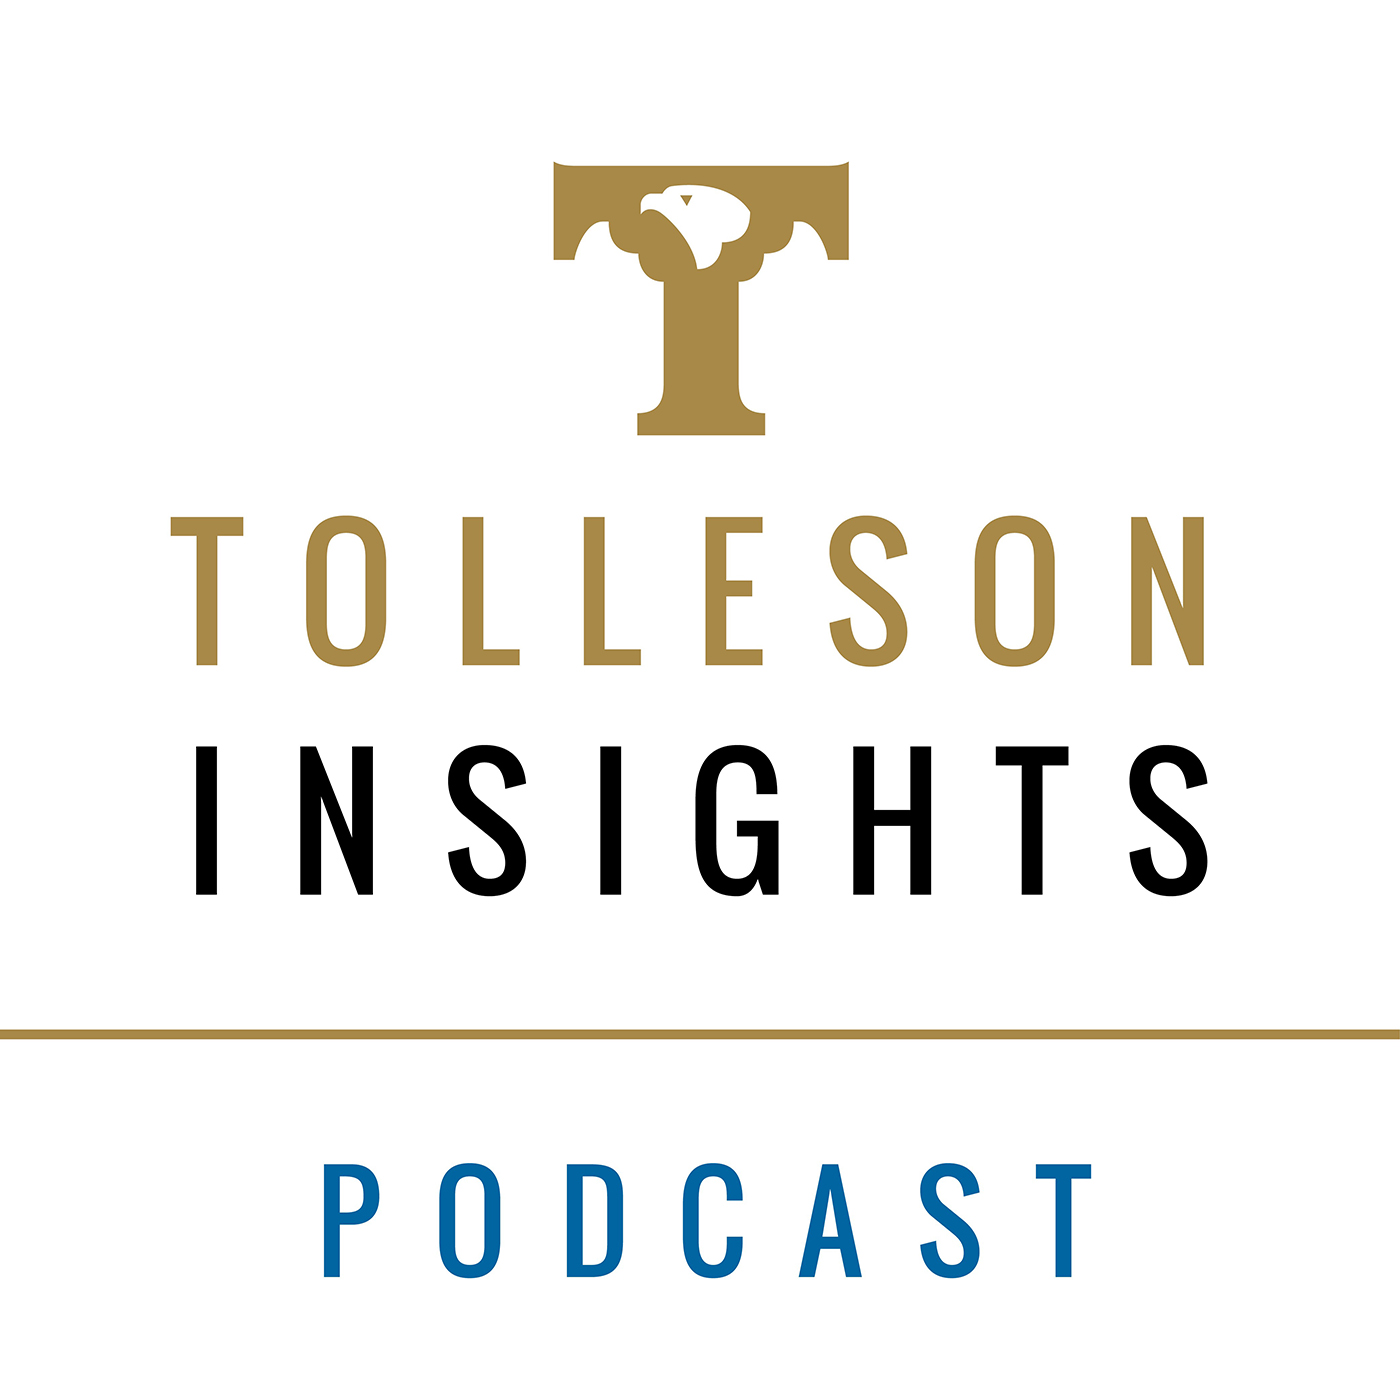 Tolleson Insights Podcast